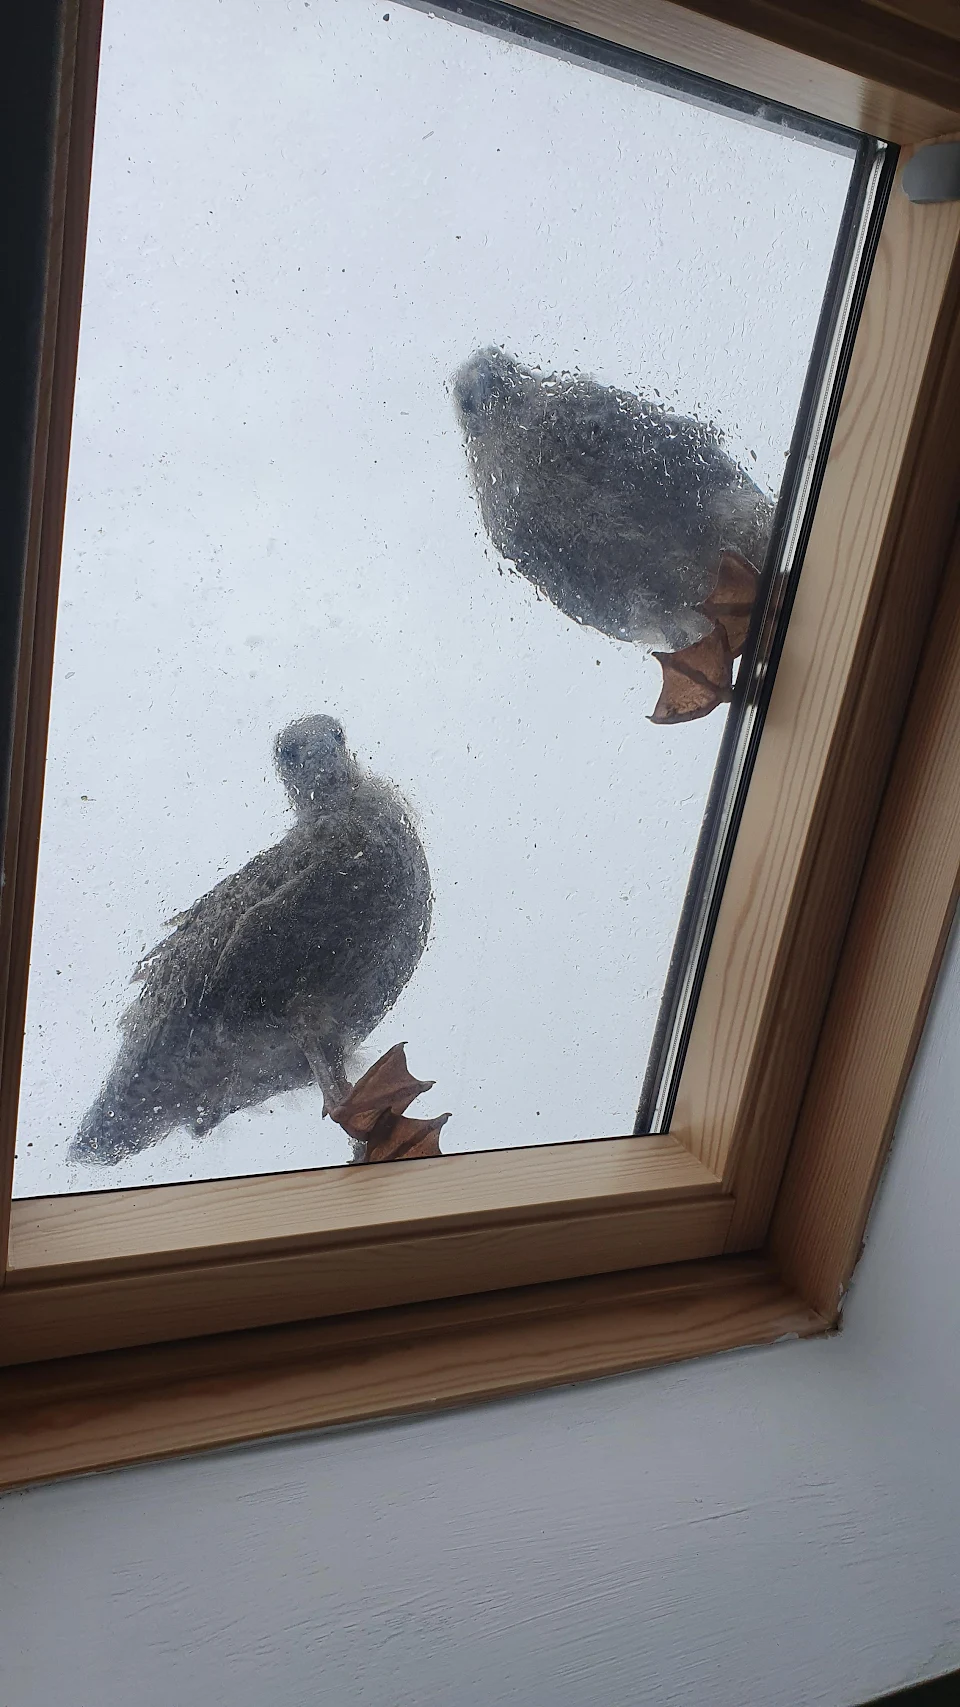 Two curious baby seagulls